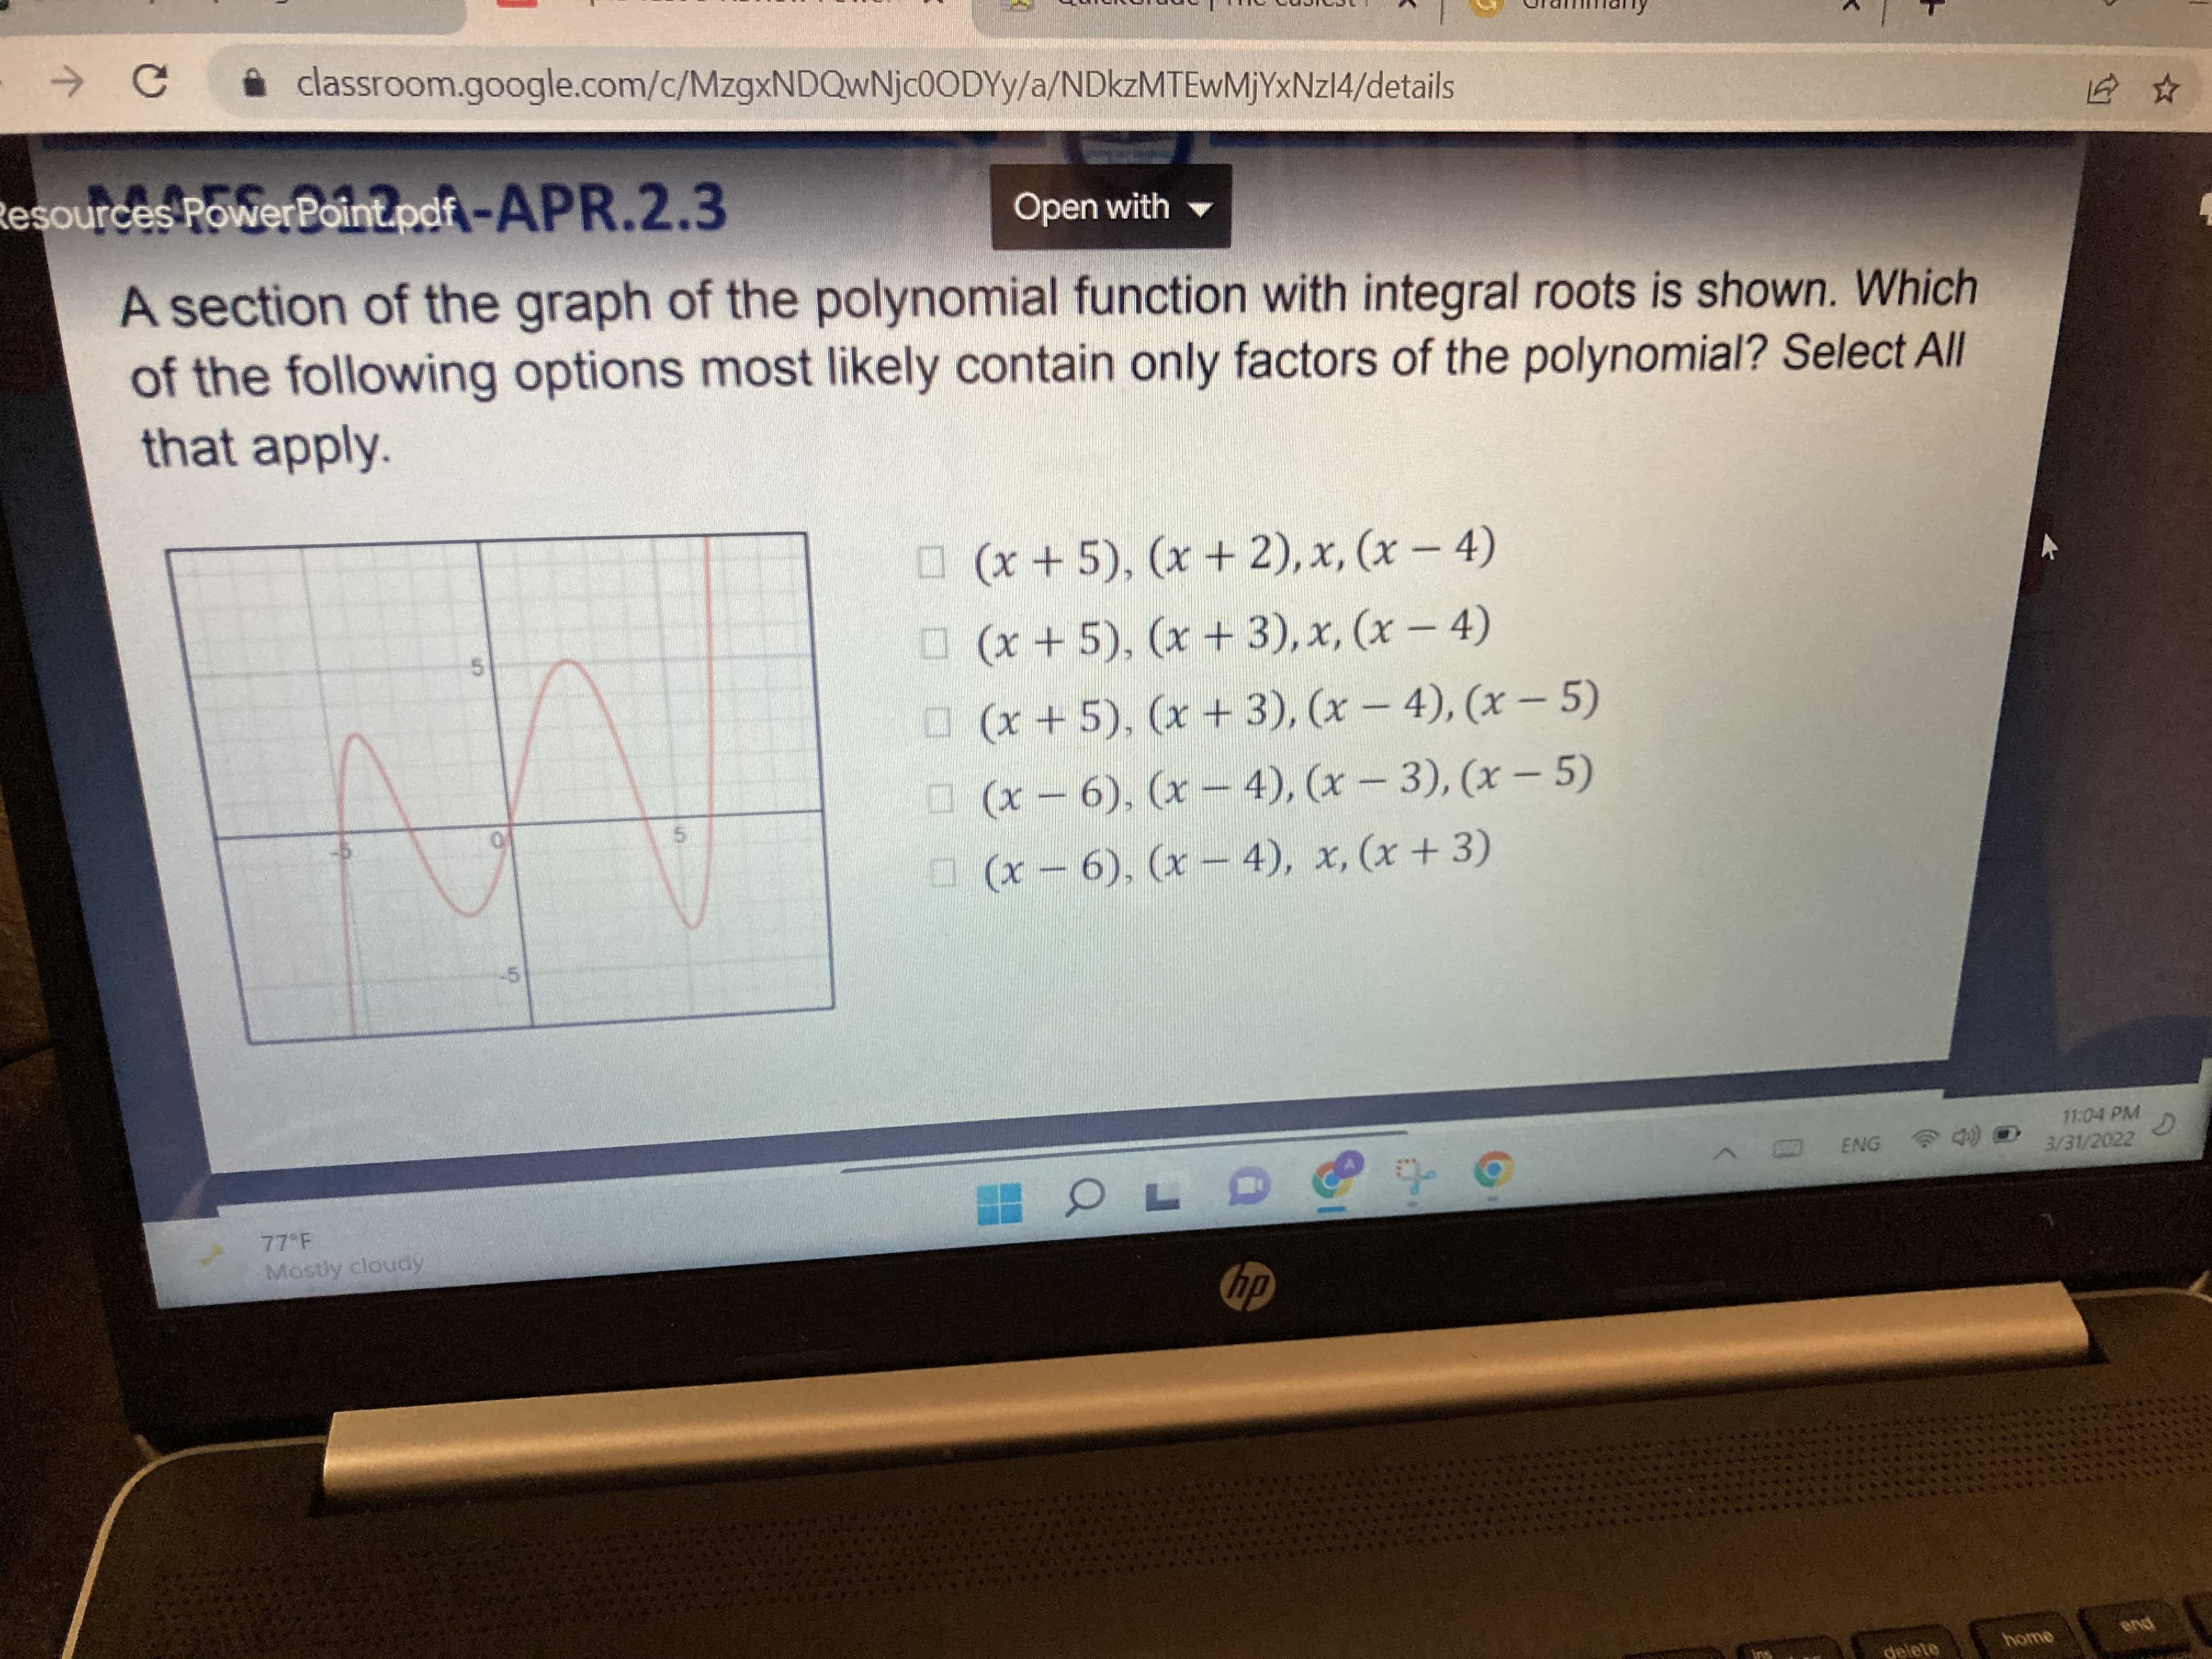 Urammany
i classroom.google.com/c/MZ9XNDQWNJC0ODYY/a/NDKZMTEWMJYXNZI4/details
Resources PowerPoint.pdf -APR.2.3
Open with
A section of the graph of the polynomial function with integral roots is shown. Which
of the following options most likely contain only factors of the polynomial? Select All
that apply.
O (x + 5), (x + 2), x, (x - 4)
O (x +5), (x + 3), x, (x- 4)
O (x +5), (x + 3), (x – 4), (x – 5)
O (x - 6), (x- 4), (x- 3), (x – 5)
5.
5.
0 (x-6), (x- 4), x, (x+ 3)
11:04 PM
3/31/2022
ENG
77 F
Mostly cloudy
dy
home
pua
delete
